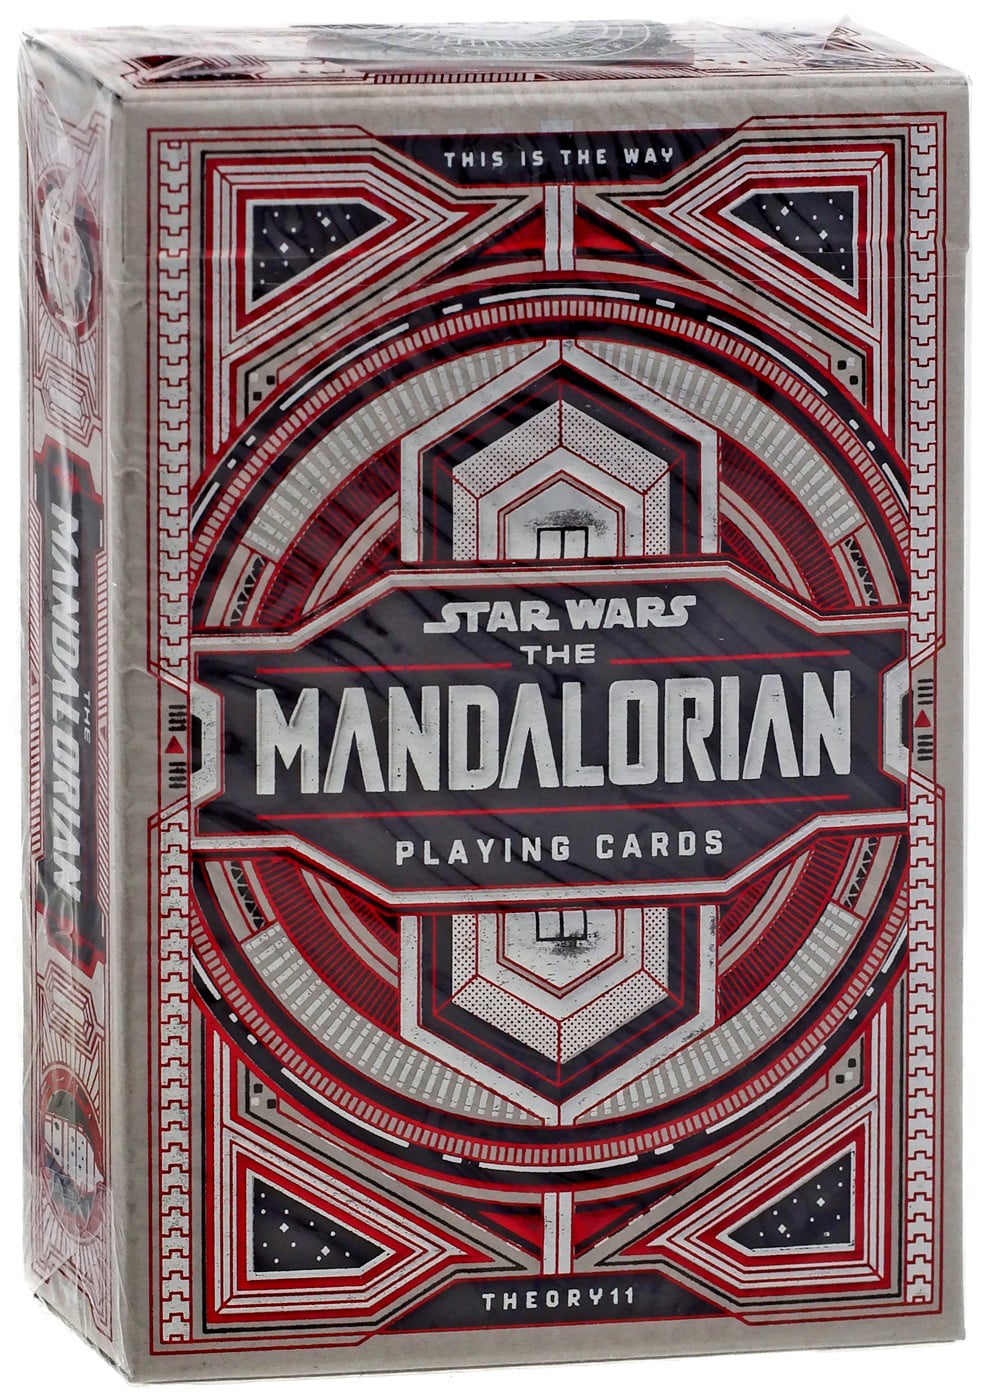 2020 Disney Star Wars Mandalorian The Child Baby Yoda Poker Sized Playing Cards for sale online 